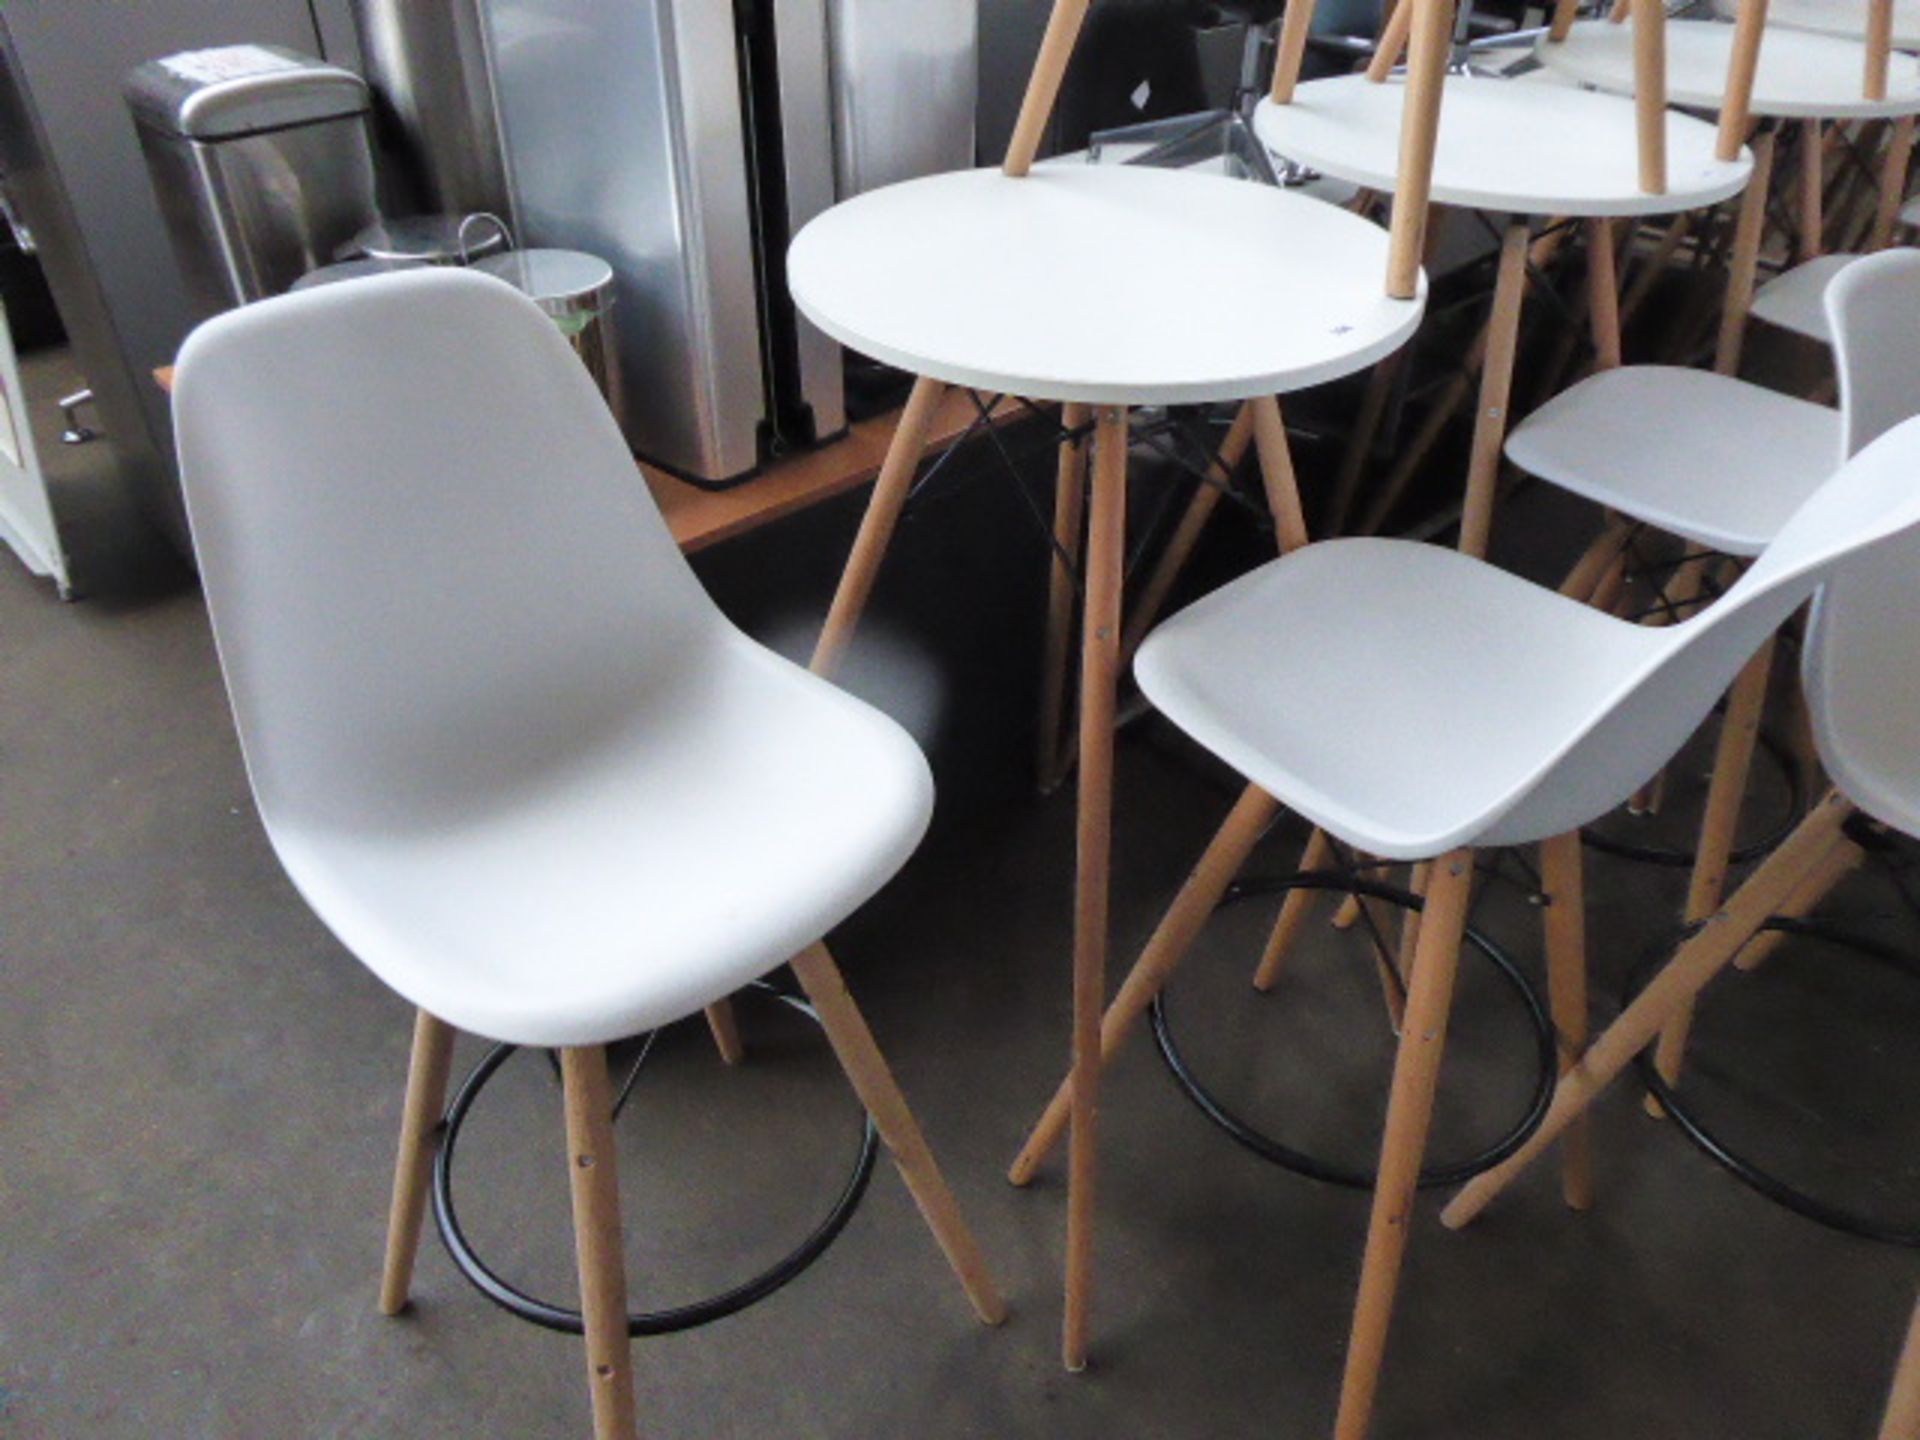 High level 60 cm diameter white top Eiffel style table with 3 matching high level stools